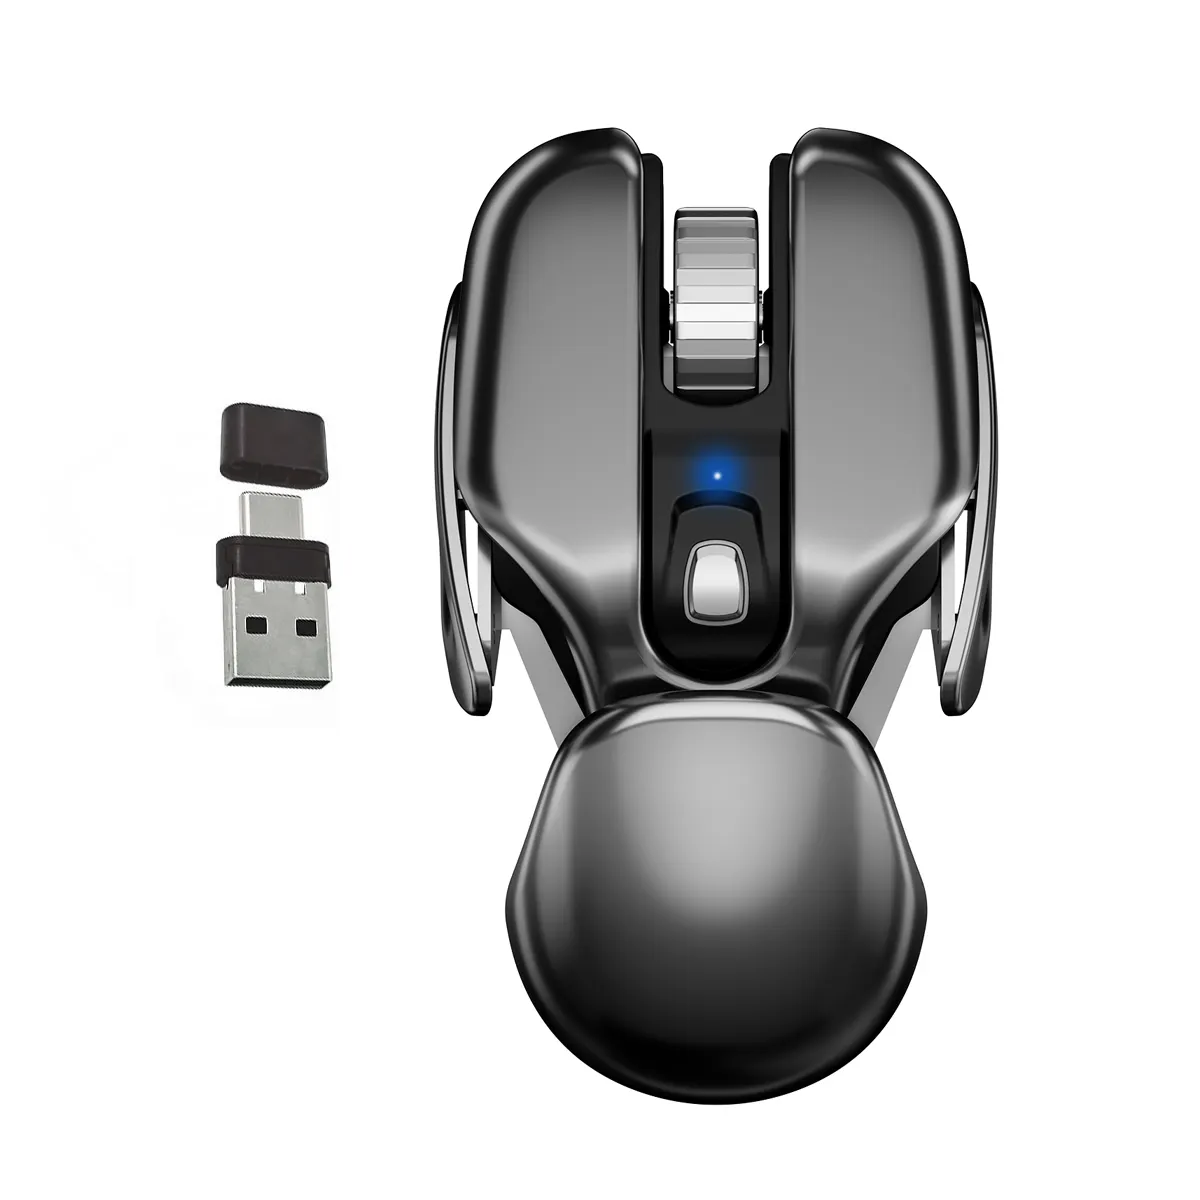 2023 NEW Design 3D Wireless Mute Mouse With USB Receiver Rechargeable Ergonomics Gaming Mouse for laptop PC